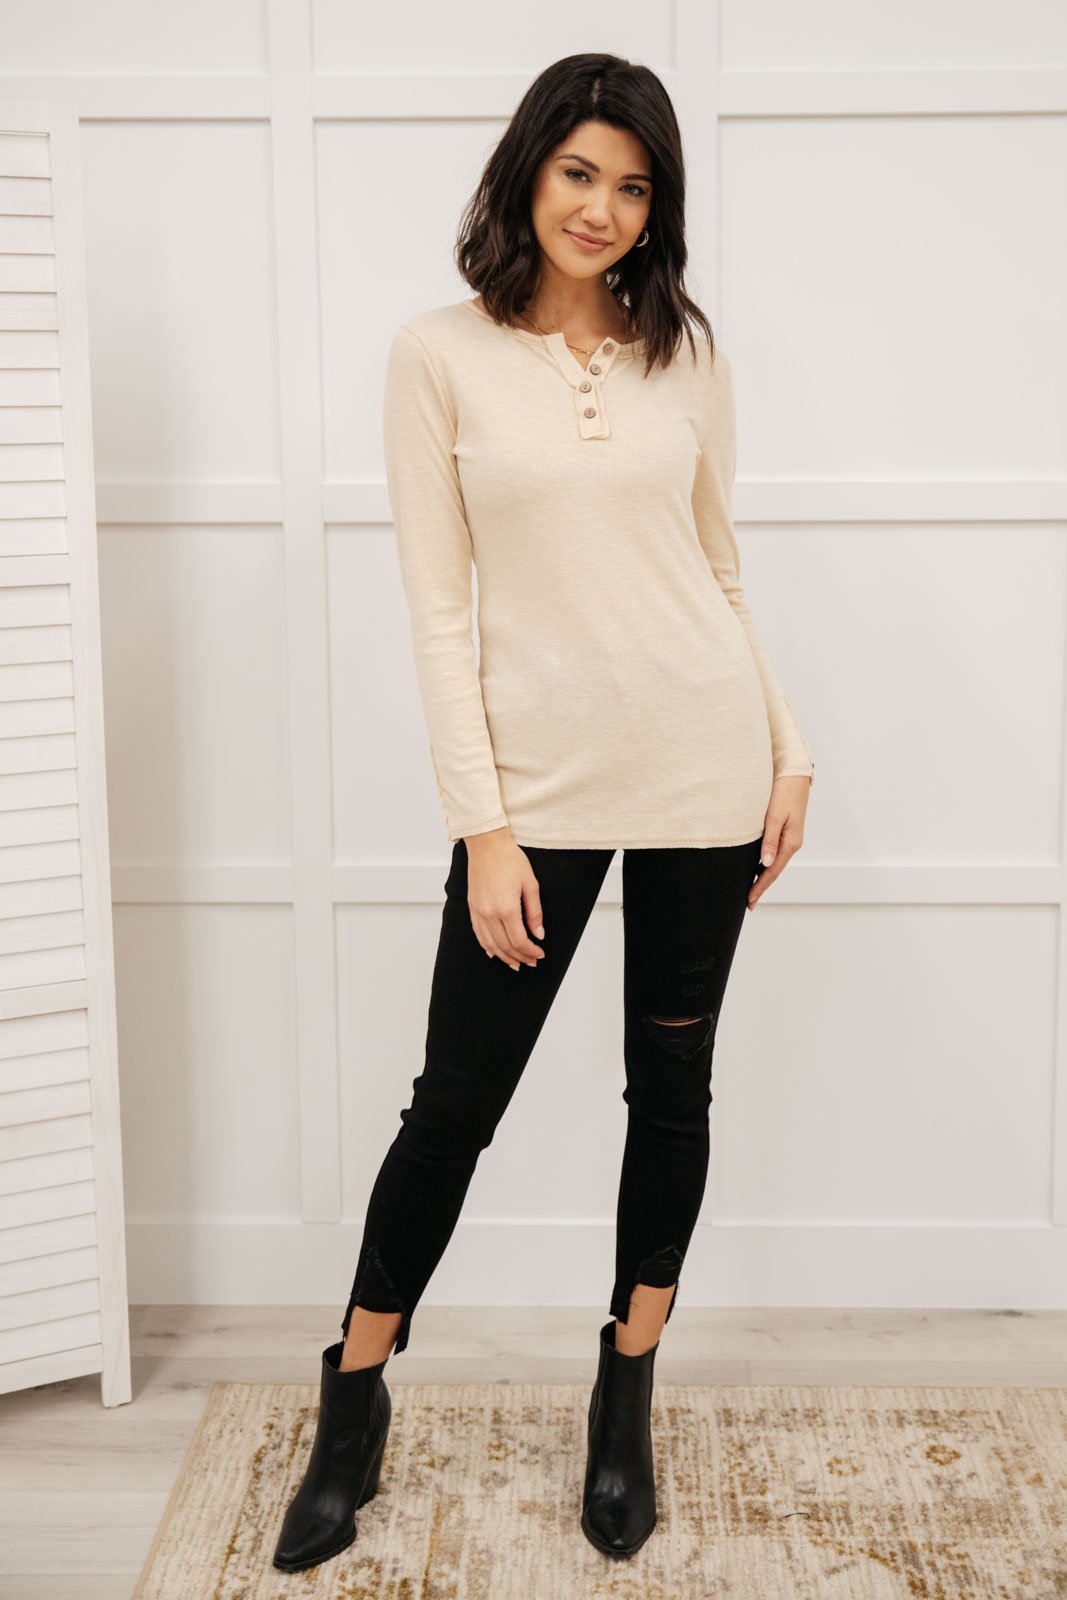 By The Fireplace Thermal Top in Oatmeal